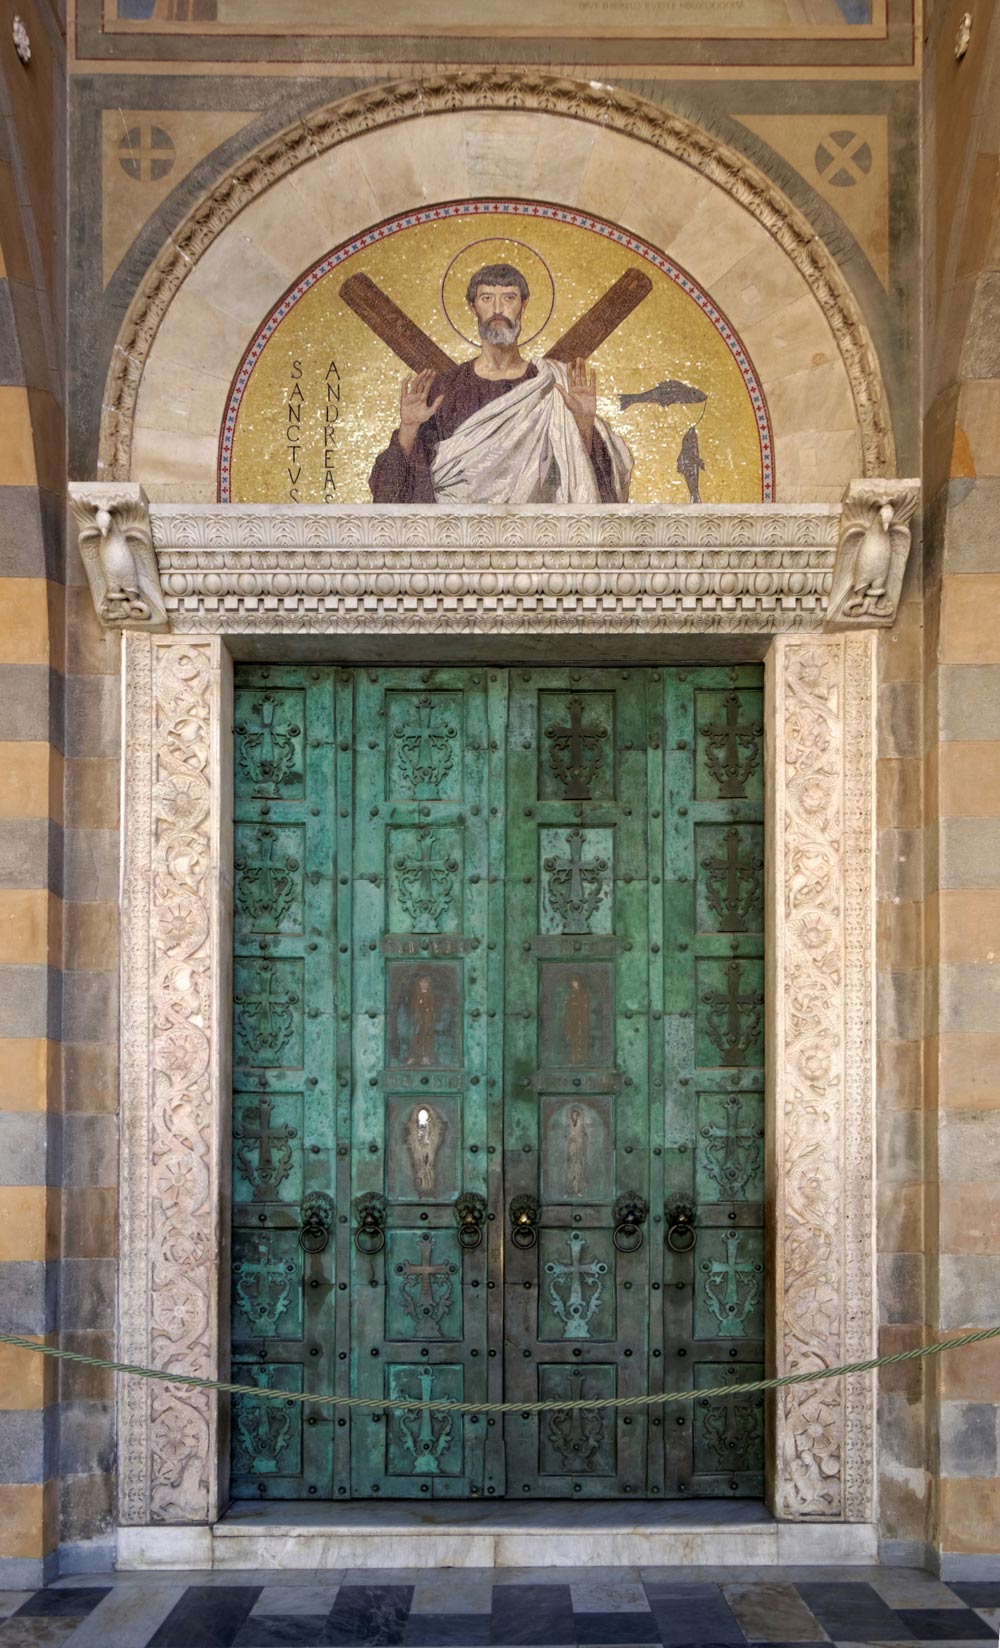 The portal of the Amalfi Cathedral. Photo: Berthold Werner